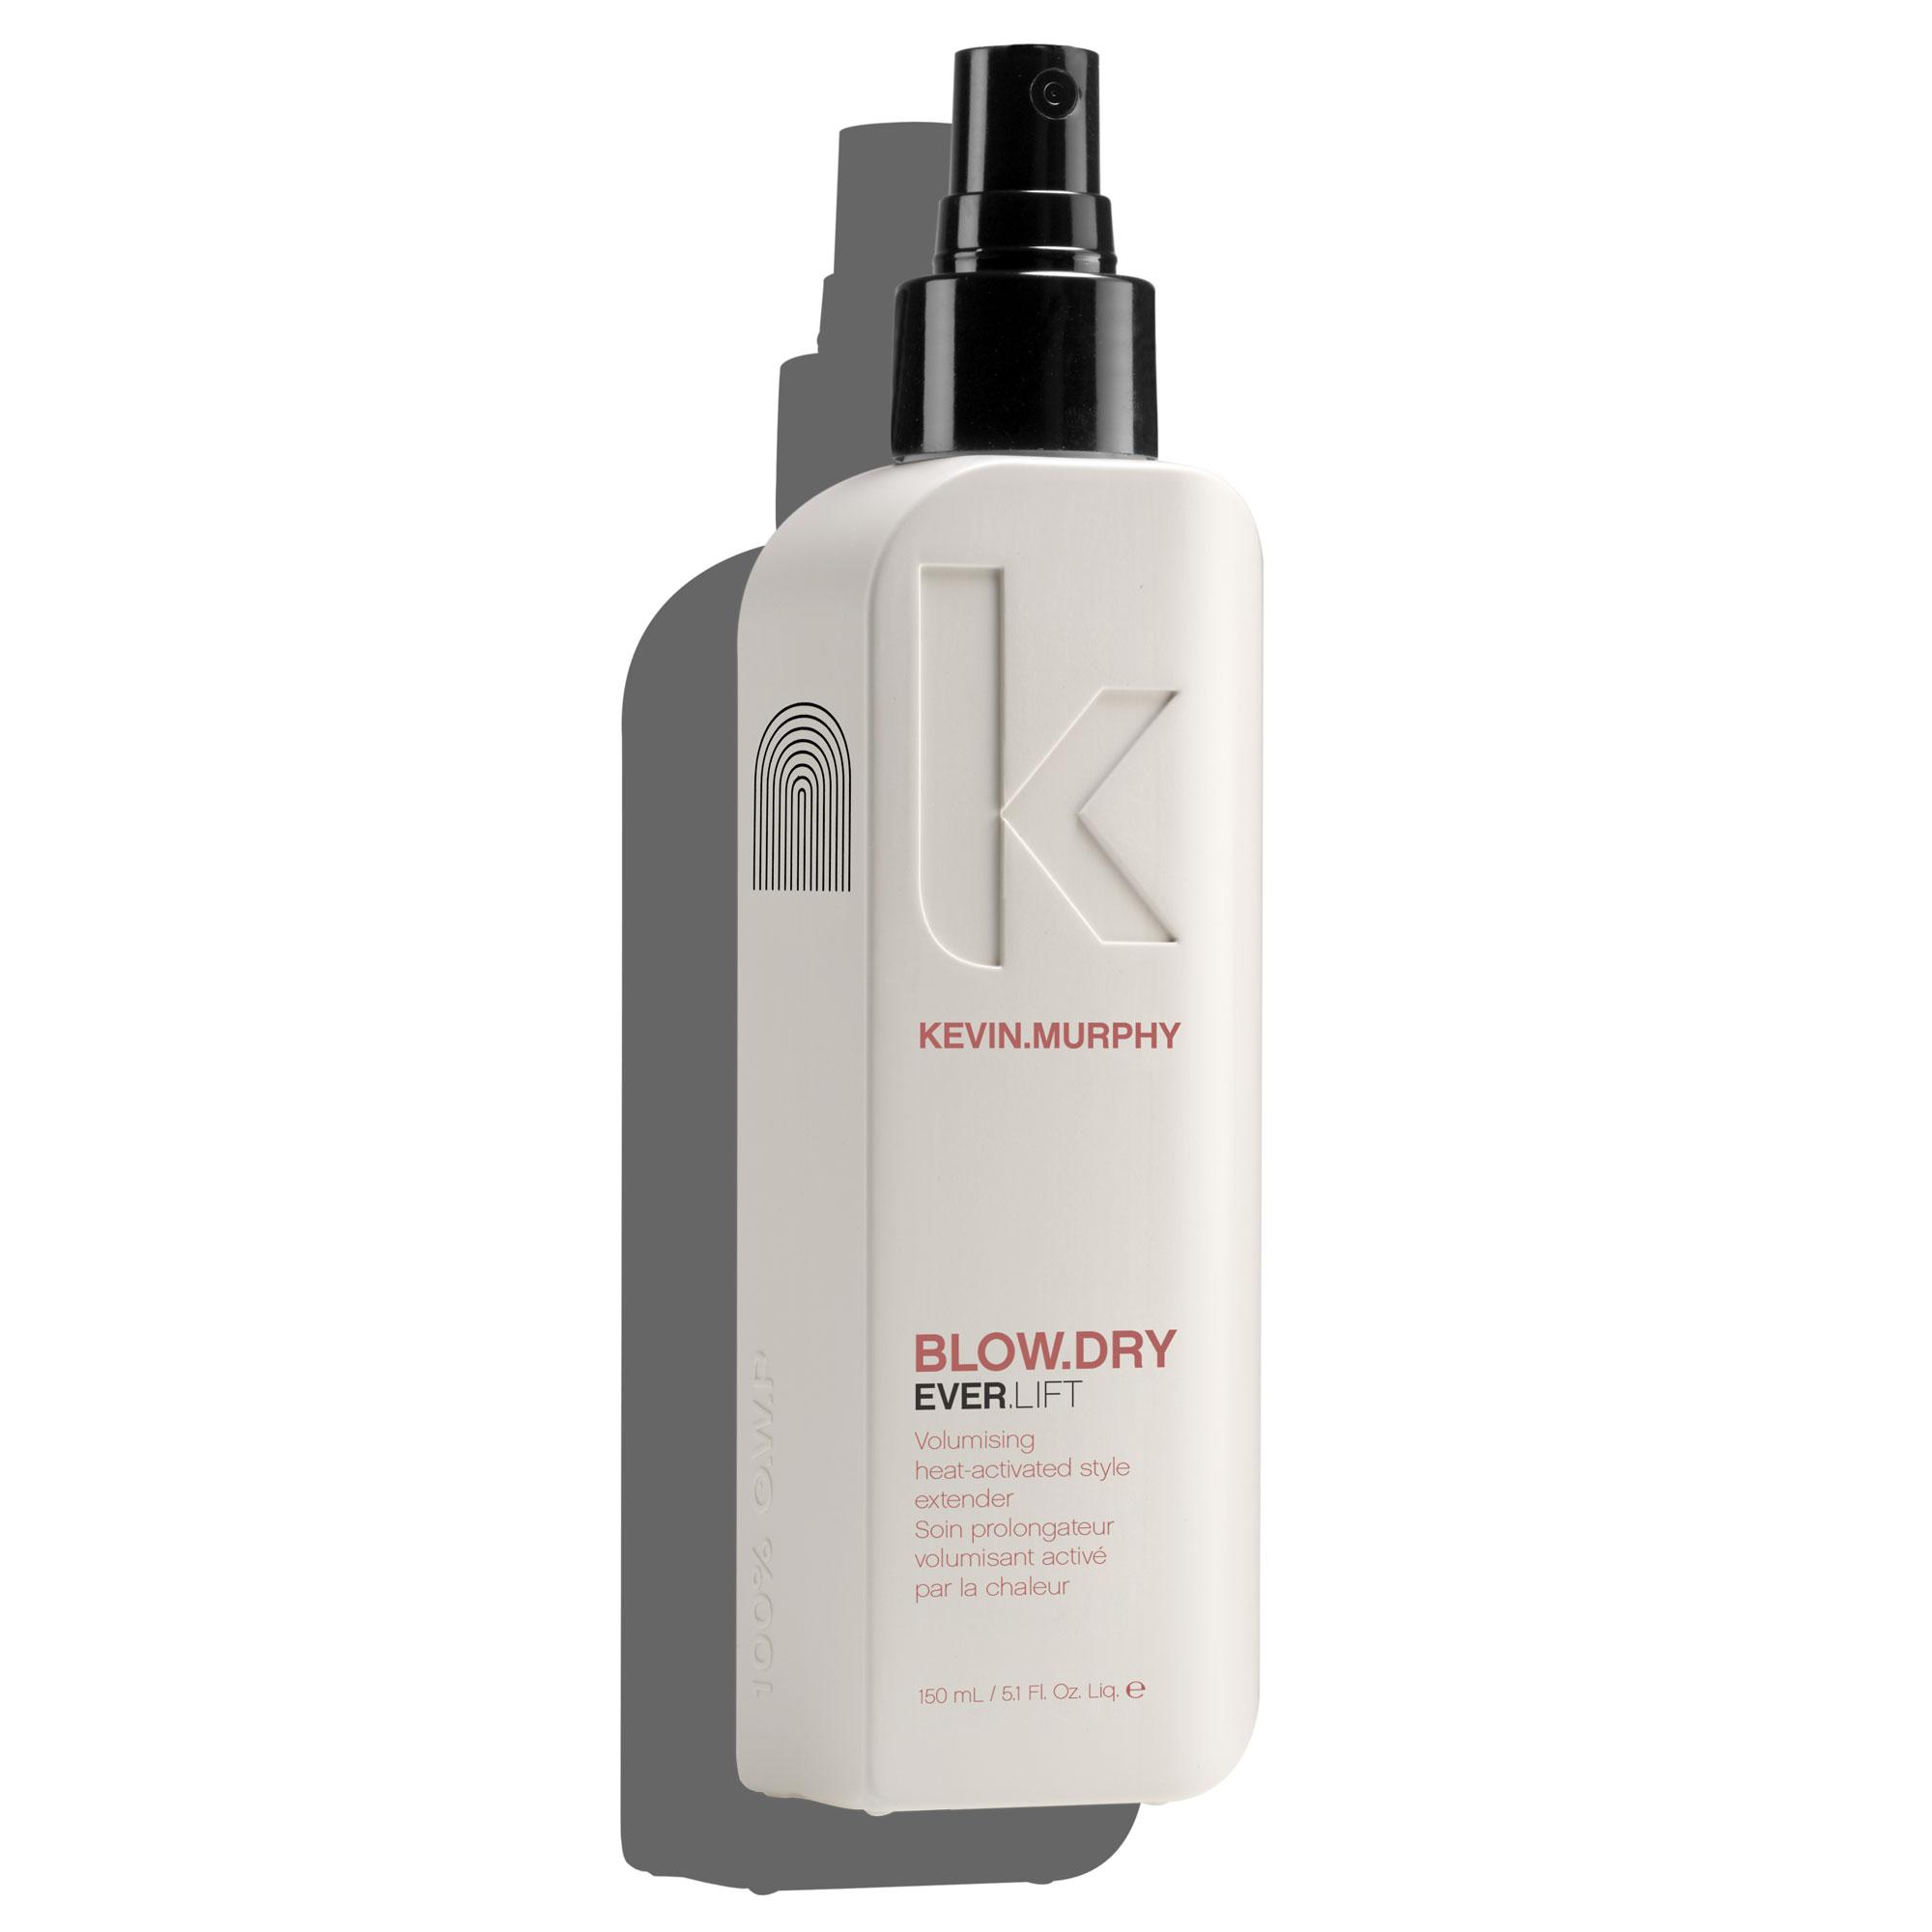 KEVIN.MURPHY BLOW.DRY EVER.LIFT 5.1oz